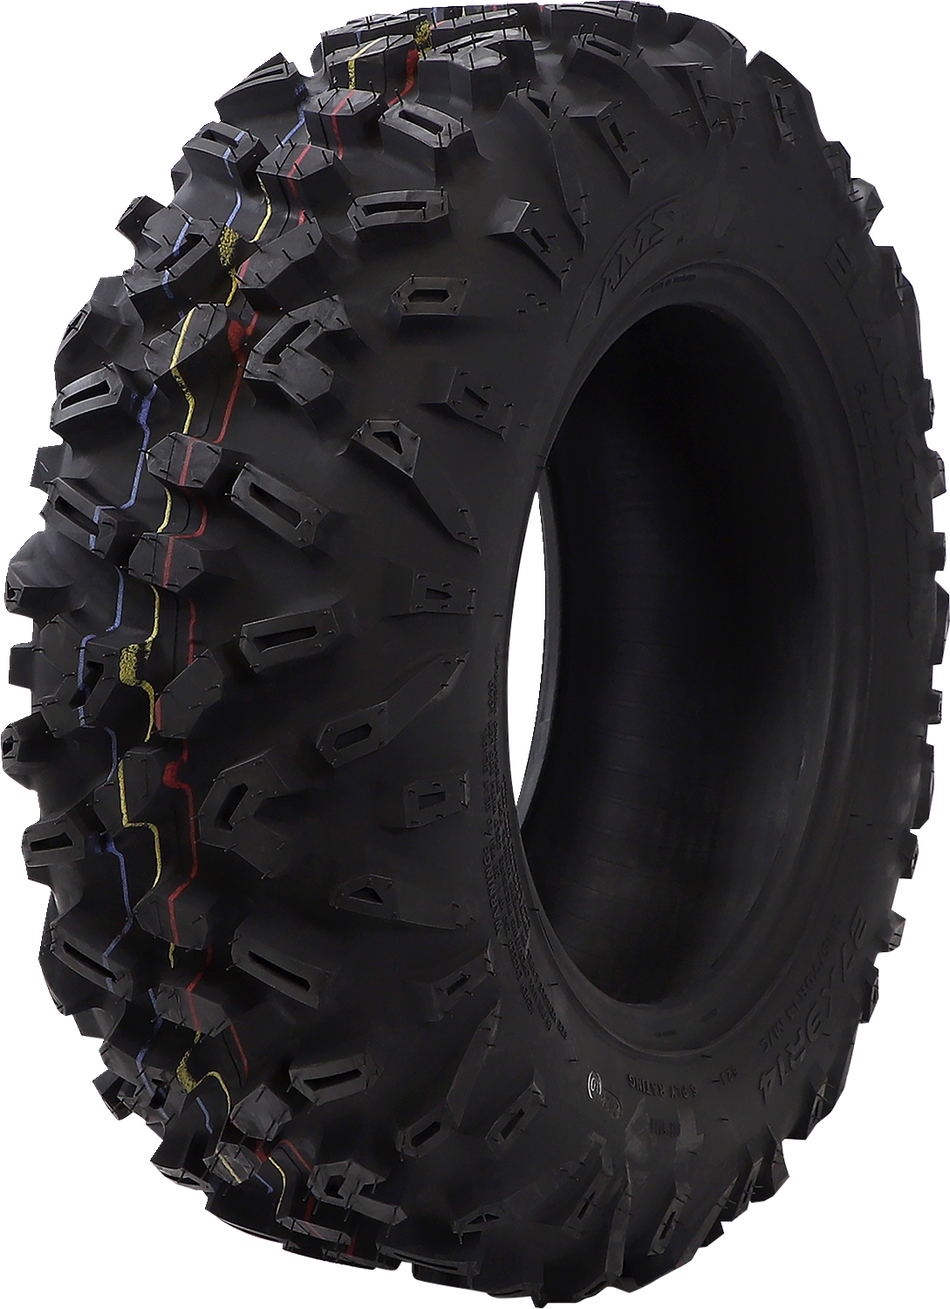 AMS Tire - Blacktail - Front - 27x9R14 - 6 Ply 1479-361